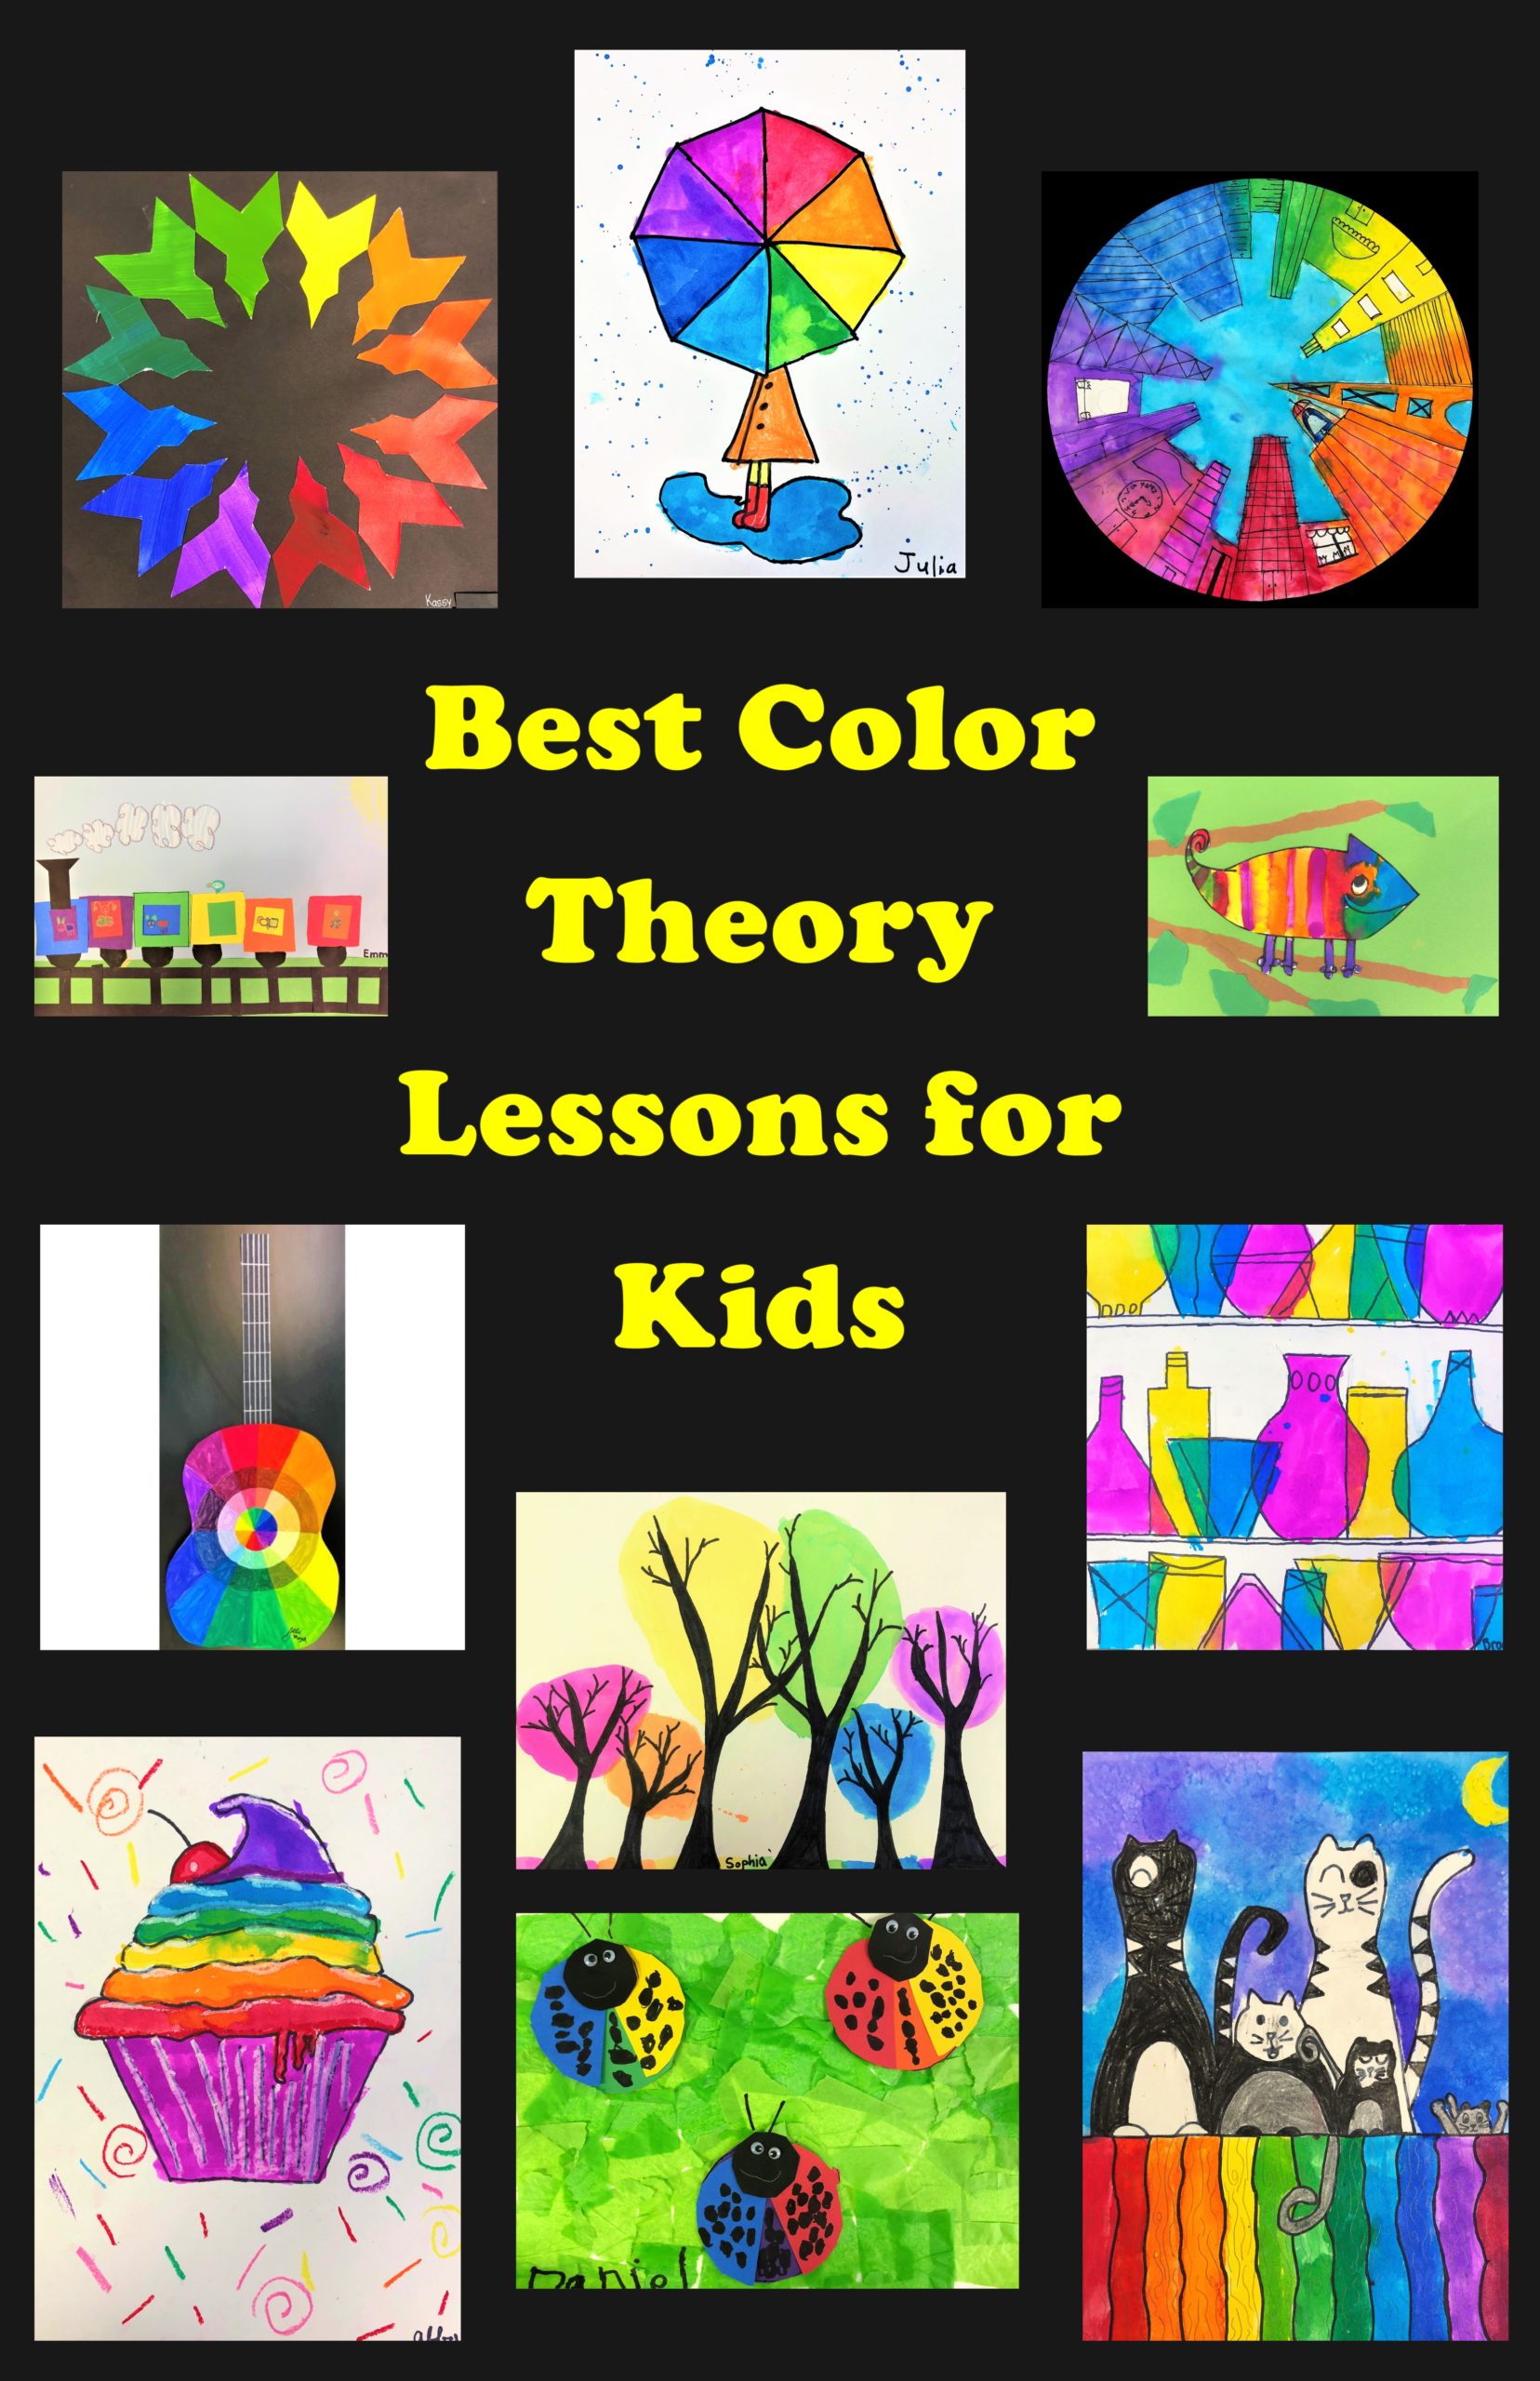 https://leahnewtonart.com/wp-content/uploads/2020/03/Best-Color-Theory-Lessons-scaled.jpg